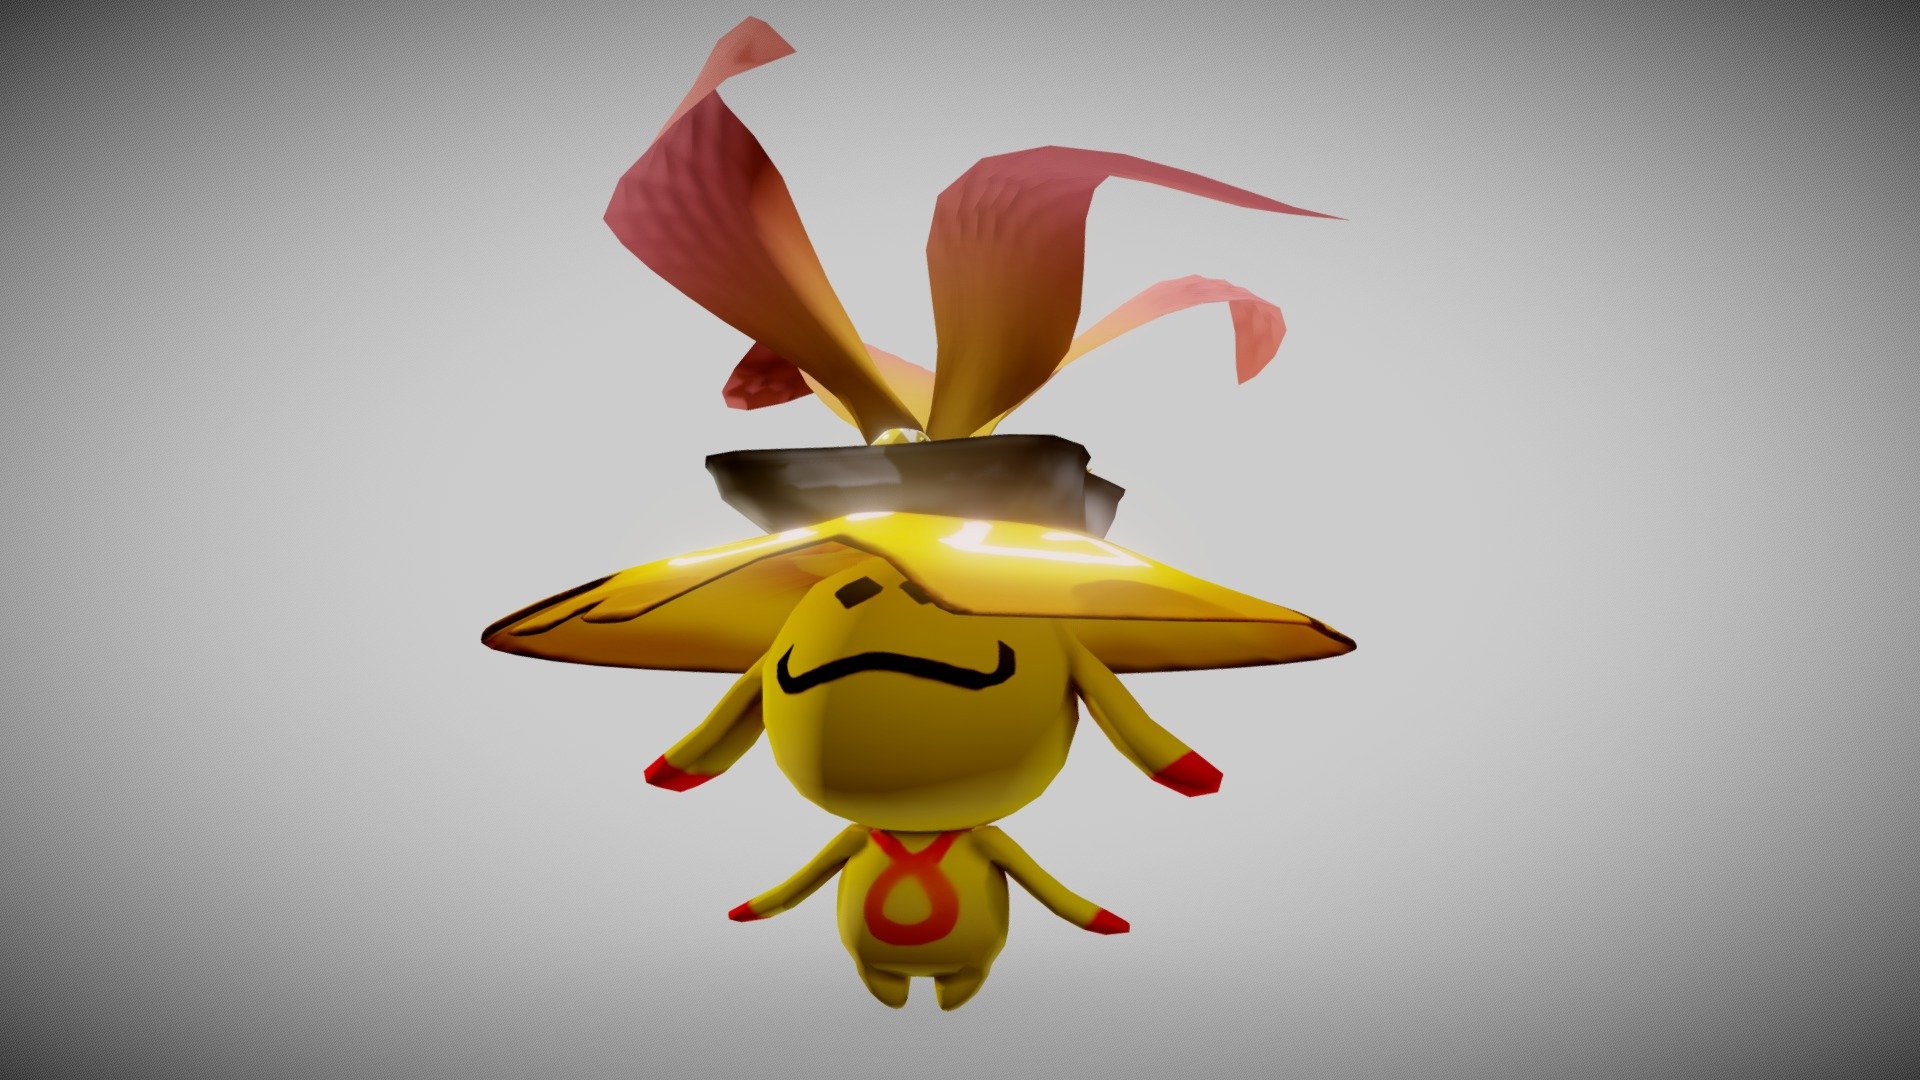 Here's a rigged model of Aranara from the game GENSHIN IMPACT. Non-rigged model also available. This is suitable to be edited in Blender. If you want to use other program like 3Ds Max, Maya, it is recommended to use obj files. Textures also included.

Ask me anything in the comment.

Thank you 3d model